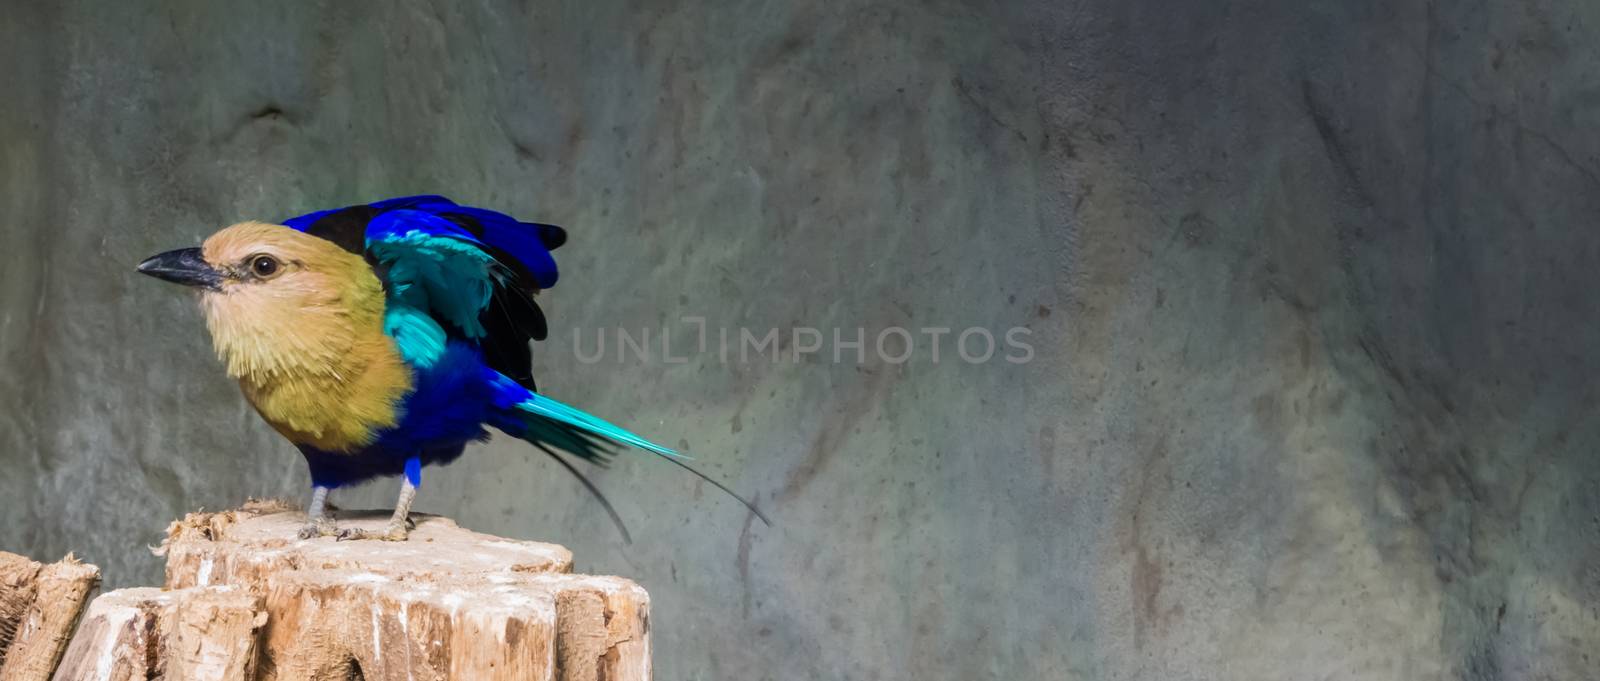 blue bellied roller standing in take off pose on a tree stump